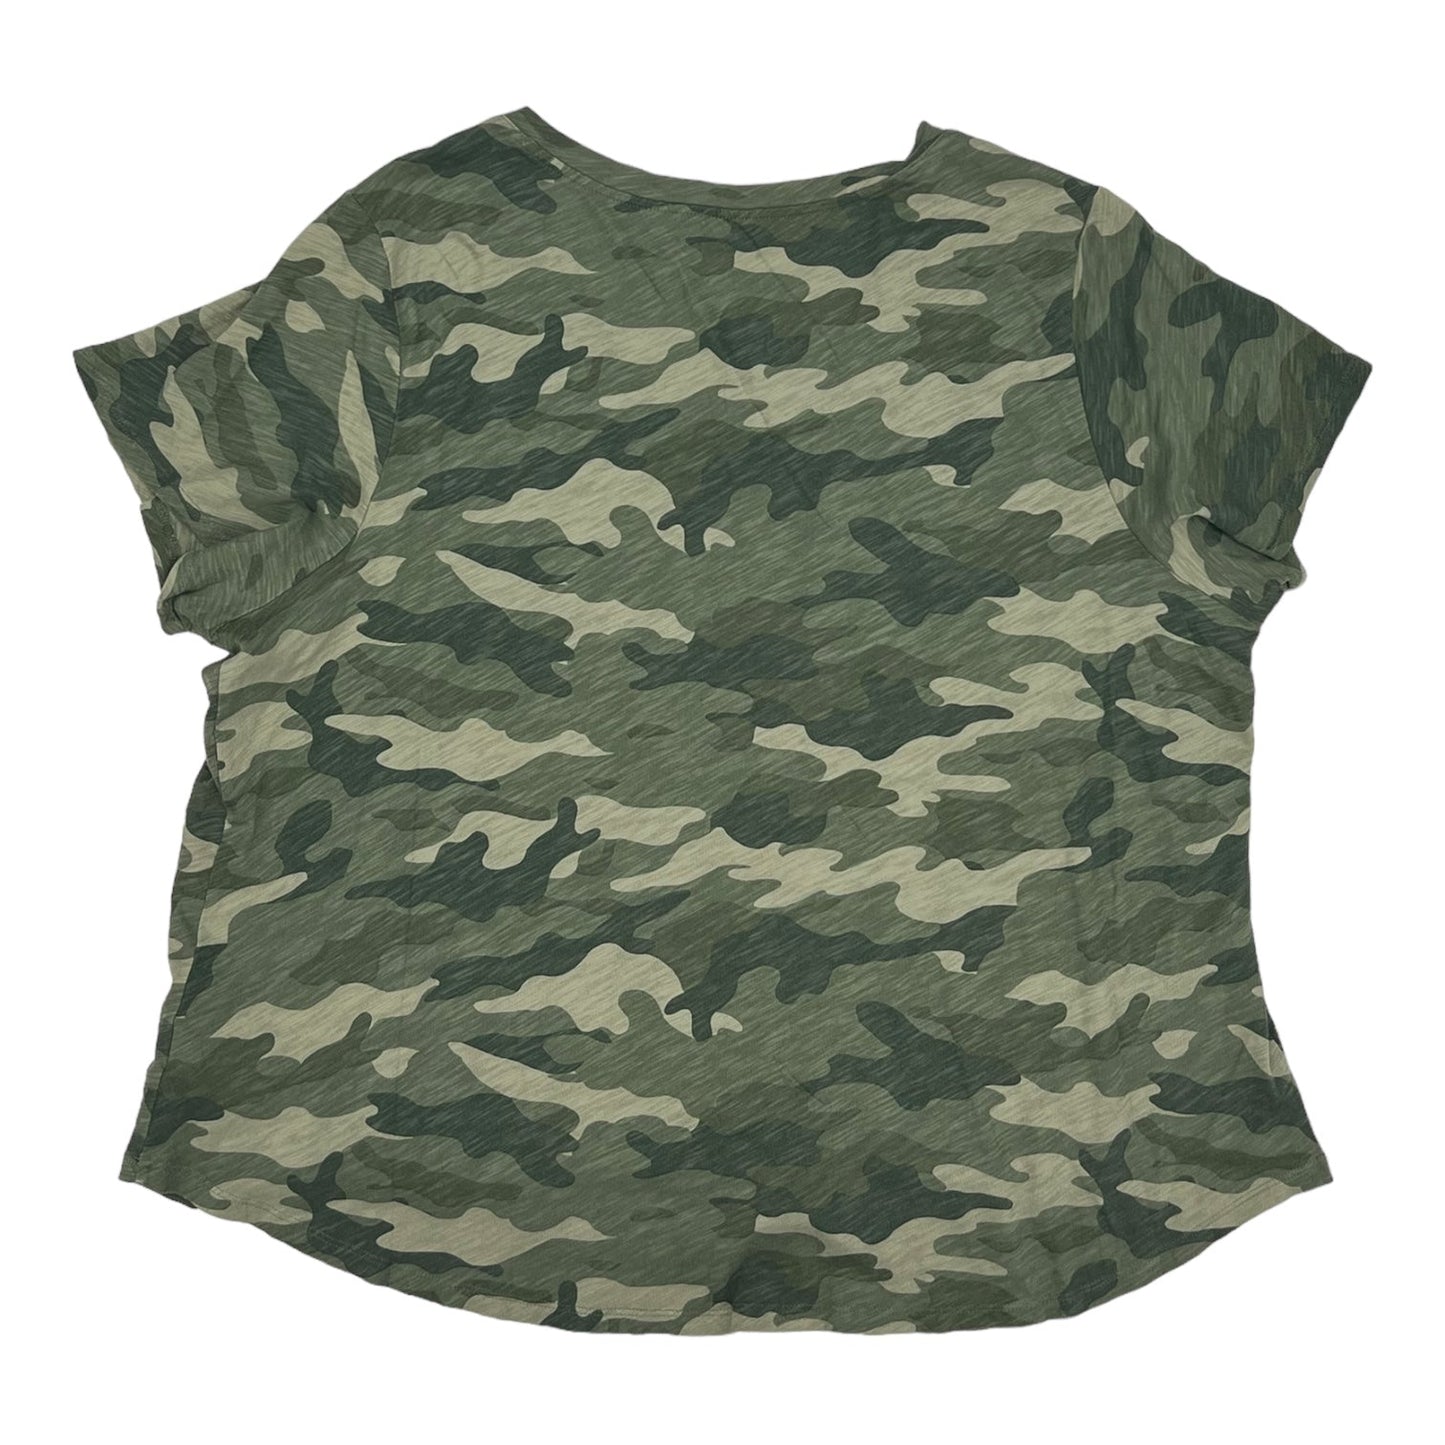 CAMOUFLAGE PRINT TOP SS by OLD NAVY Size:2X